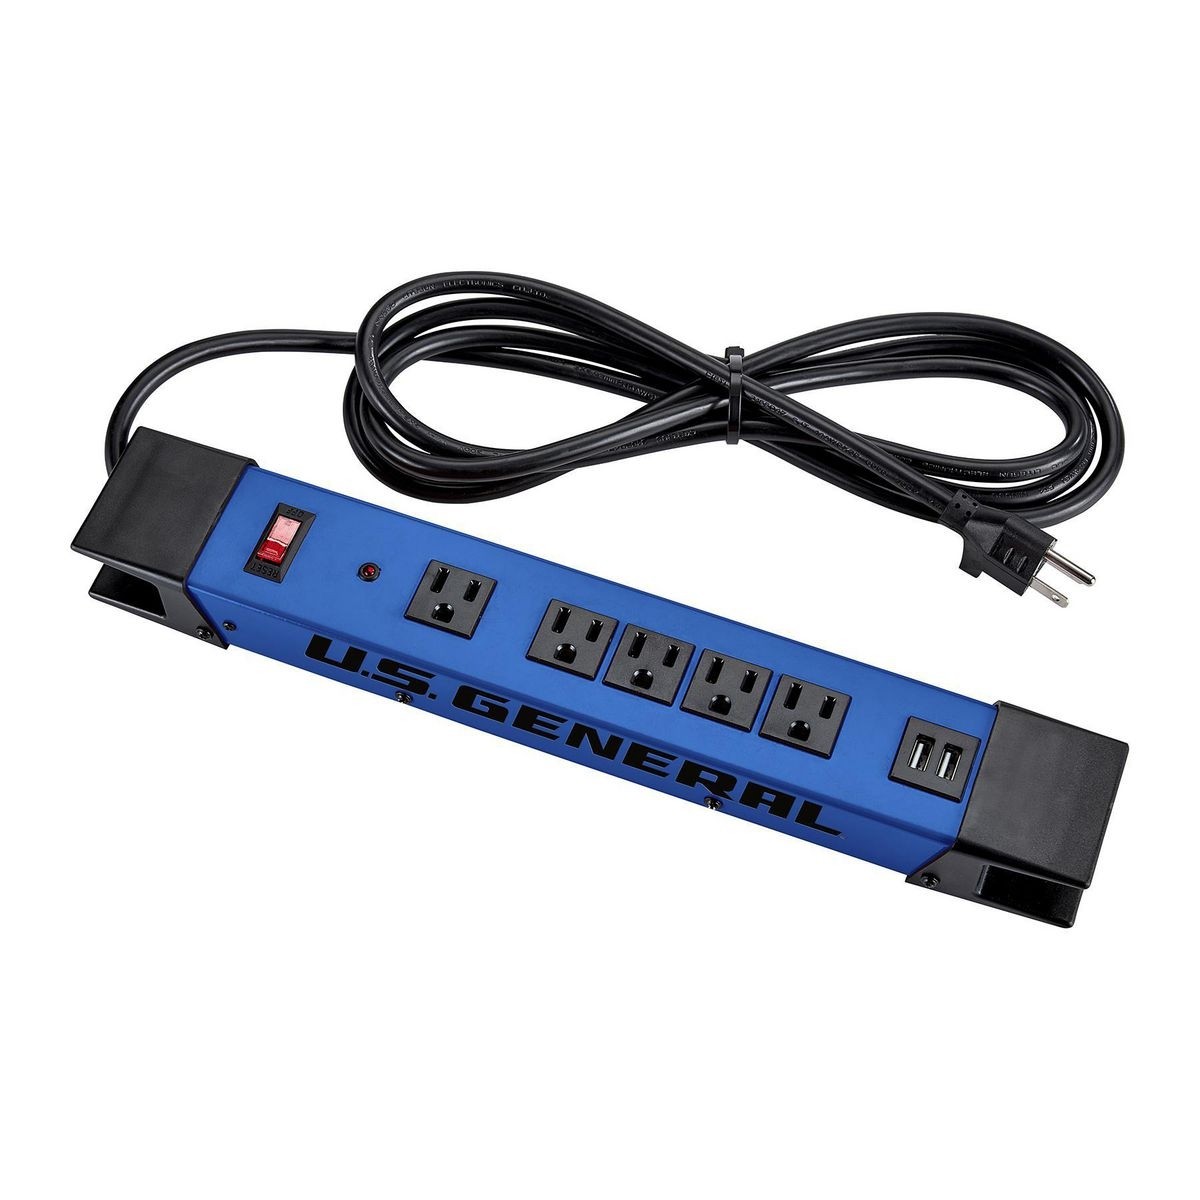 U.S. GENERAL 5 Outlet Magnetic Power Strip With Metal Housing And 2 USB Ports – Blue – Item 64876